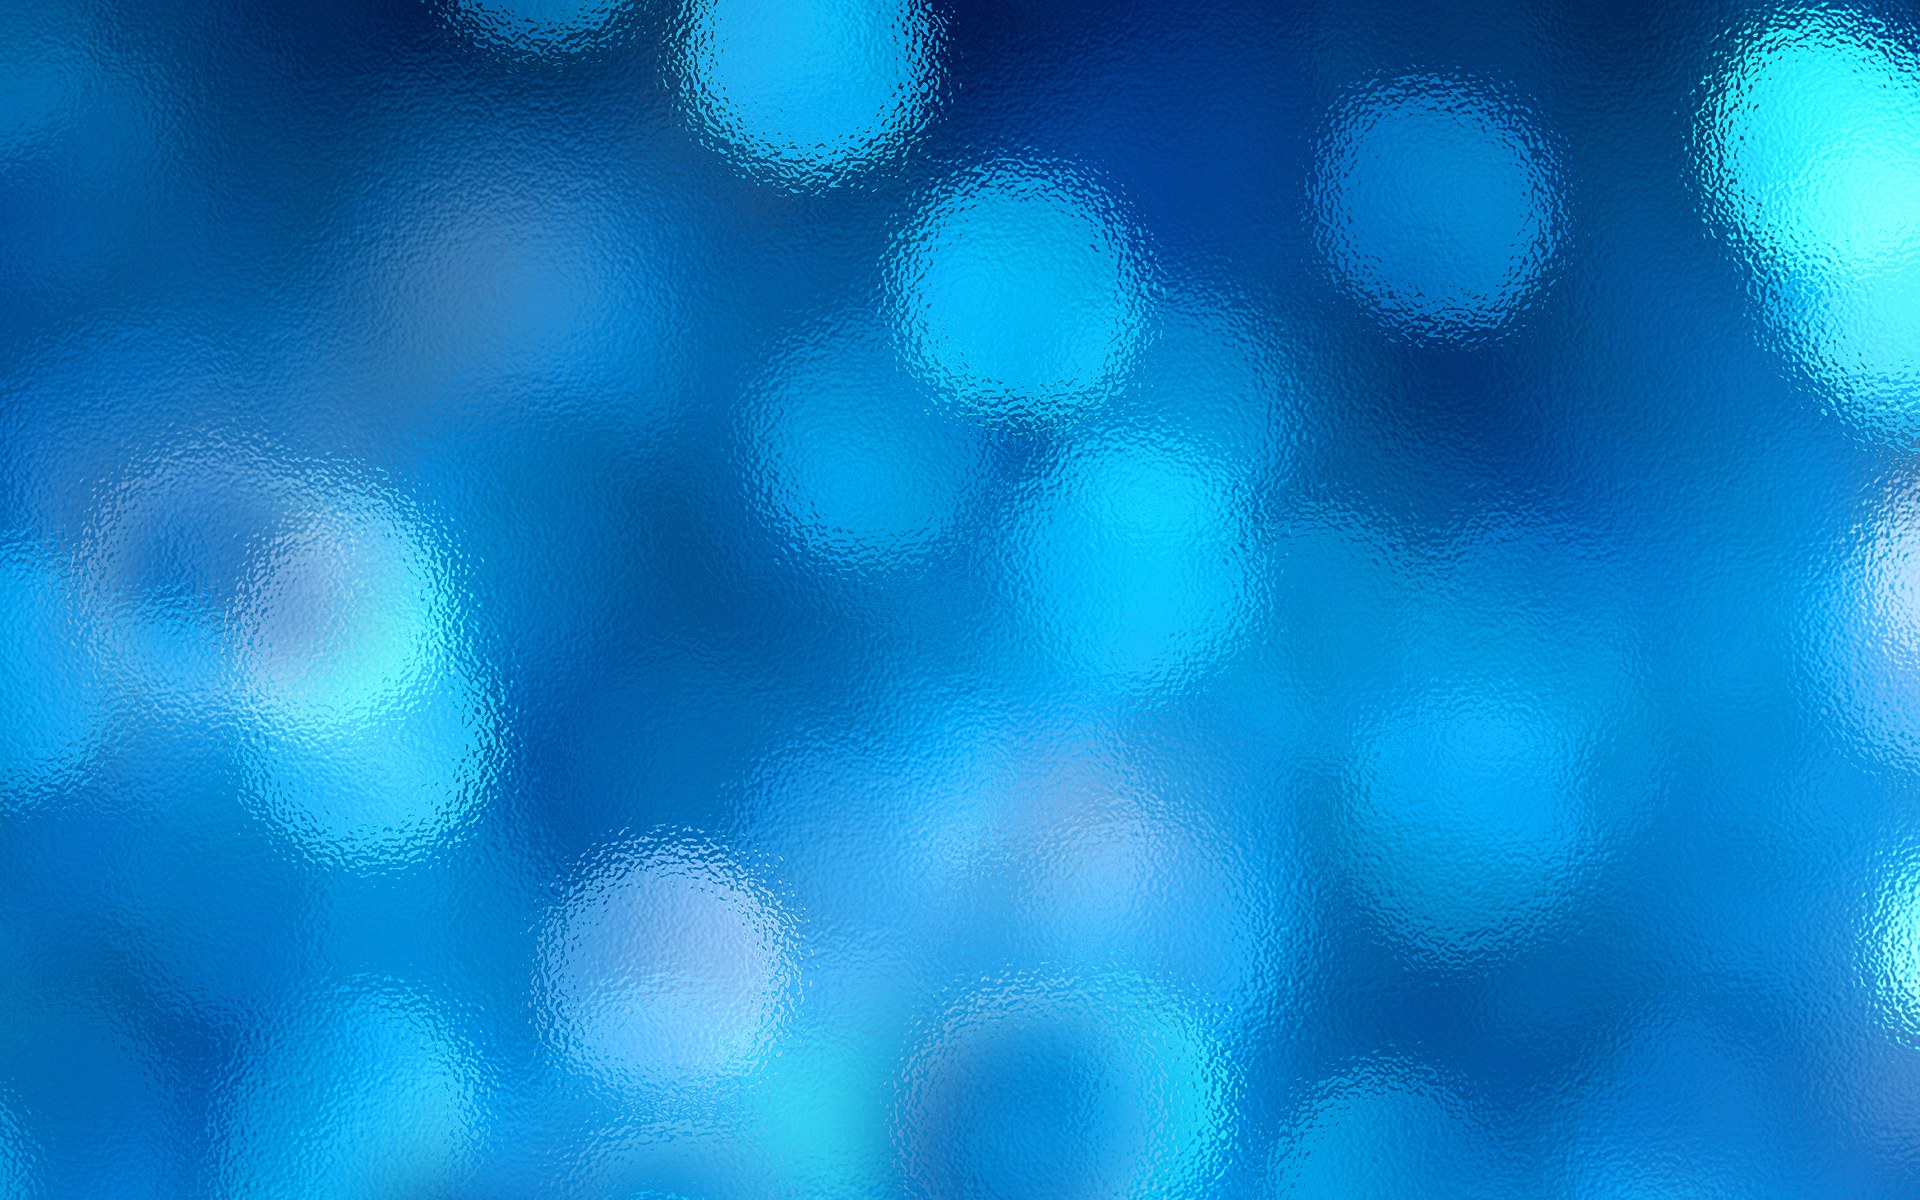 Org Wp Content Uploads Abstract Blue Background Jpg